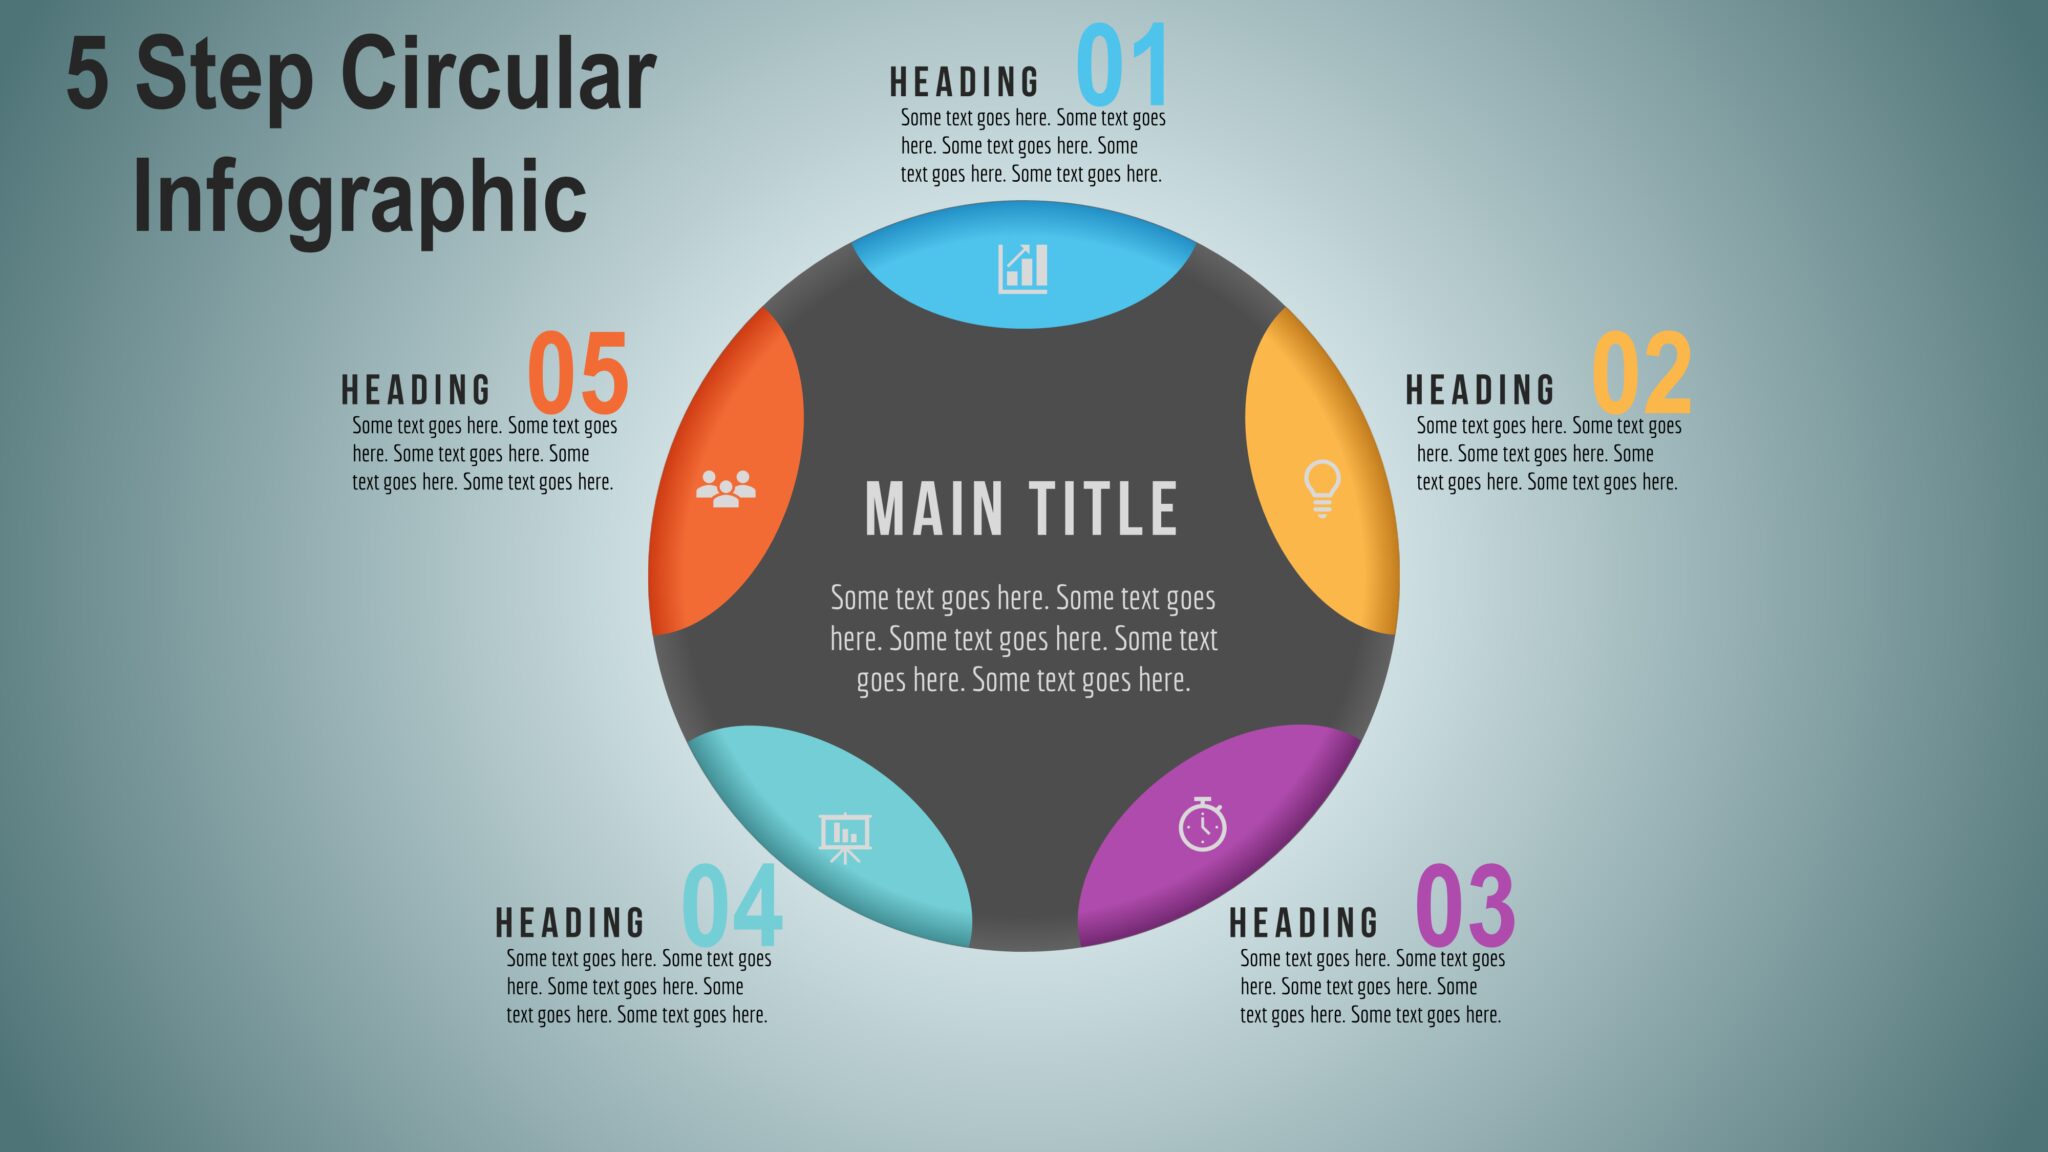 38powerpoint 5 Step Circular Infographic Powerup With Powerpoint 8976